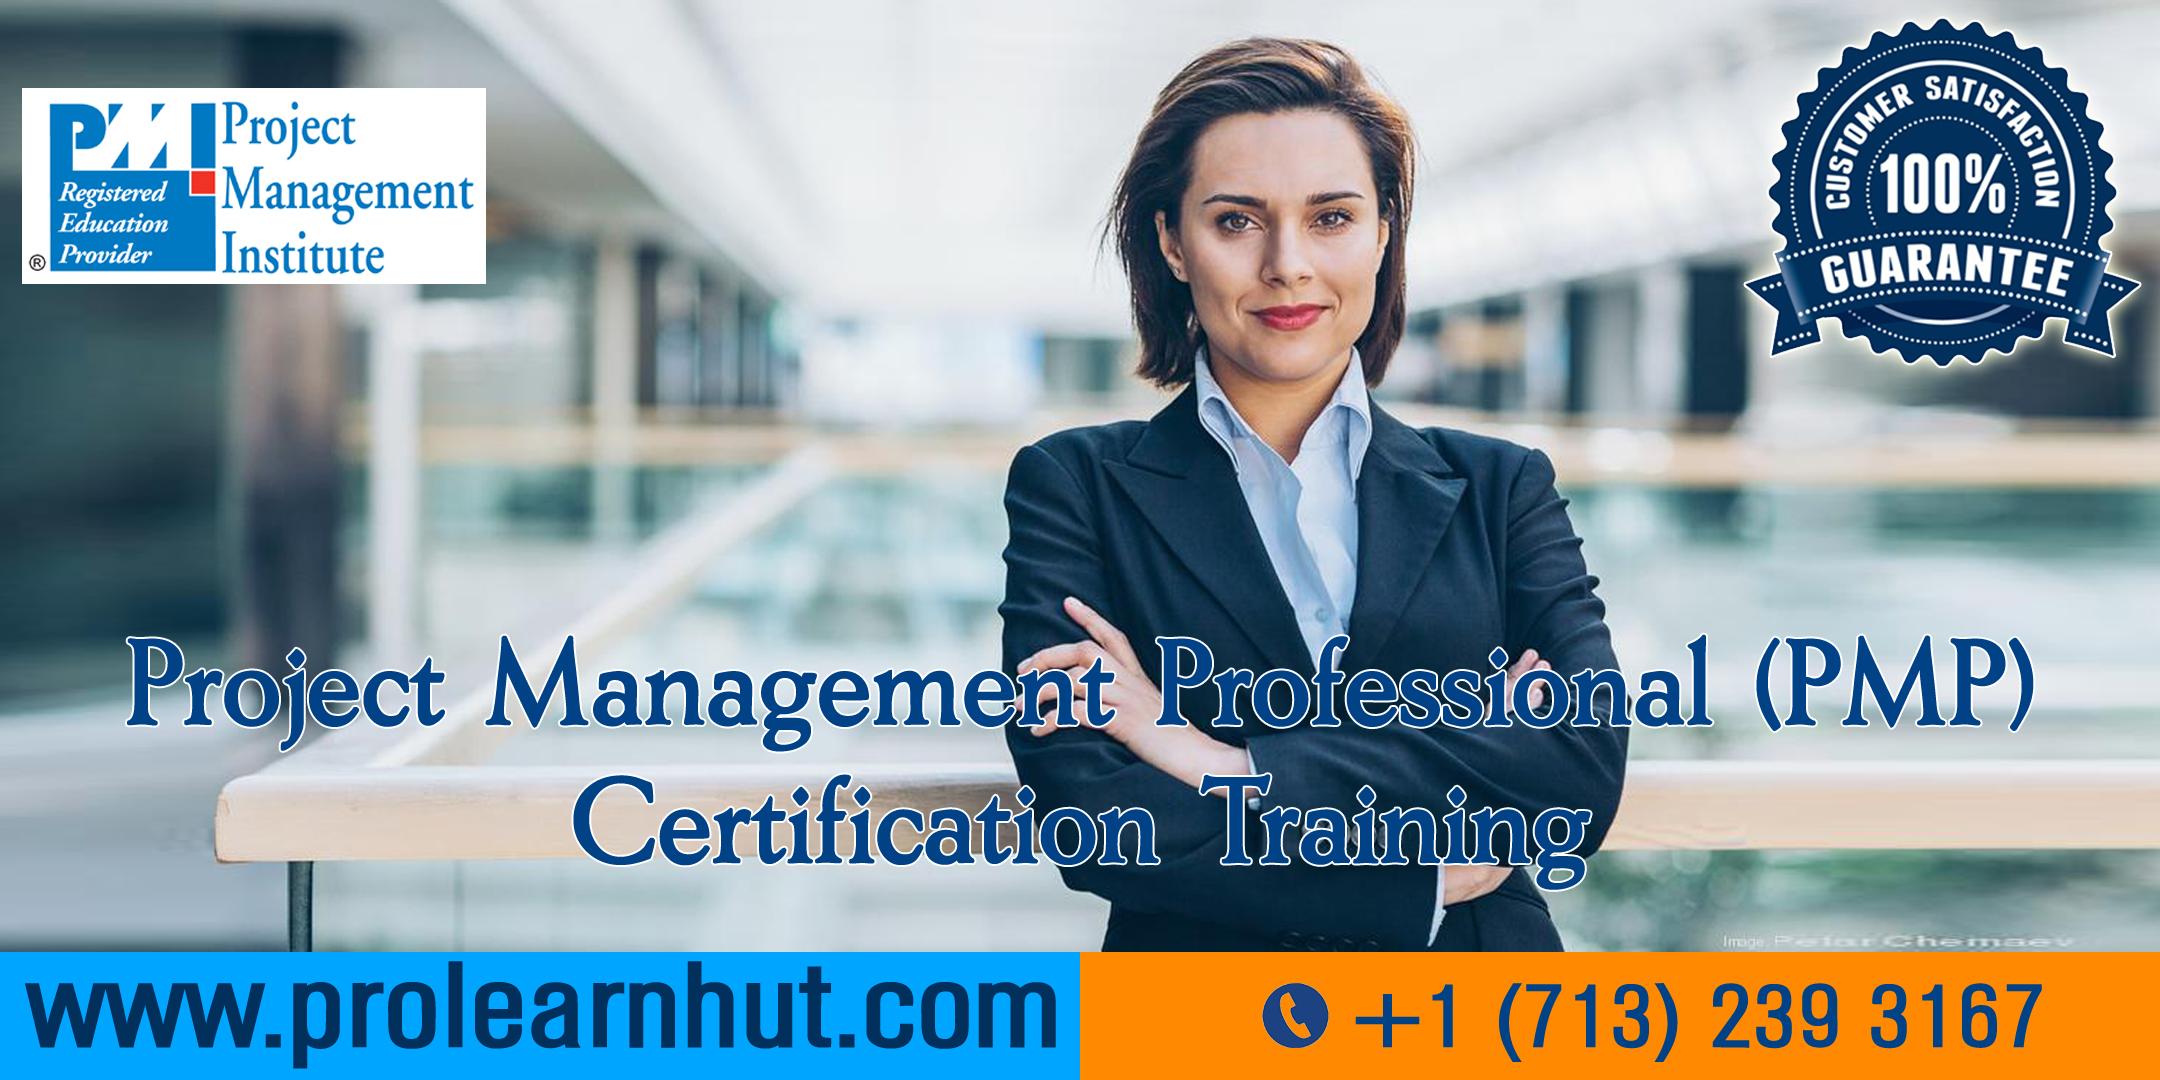 PMP Certification | Project Management Certification| PMP Training in Cary, NC | ProLearnHut